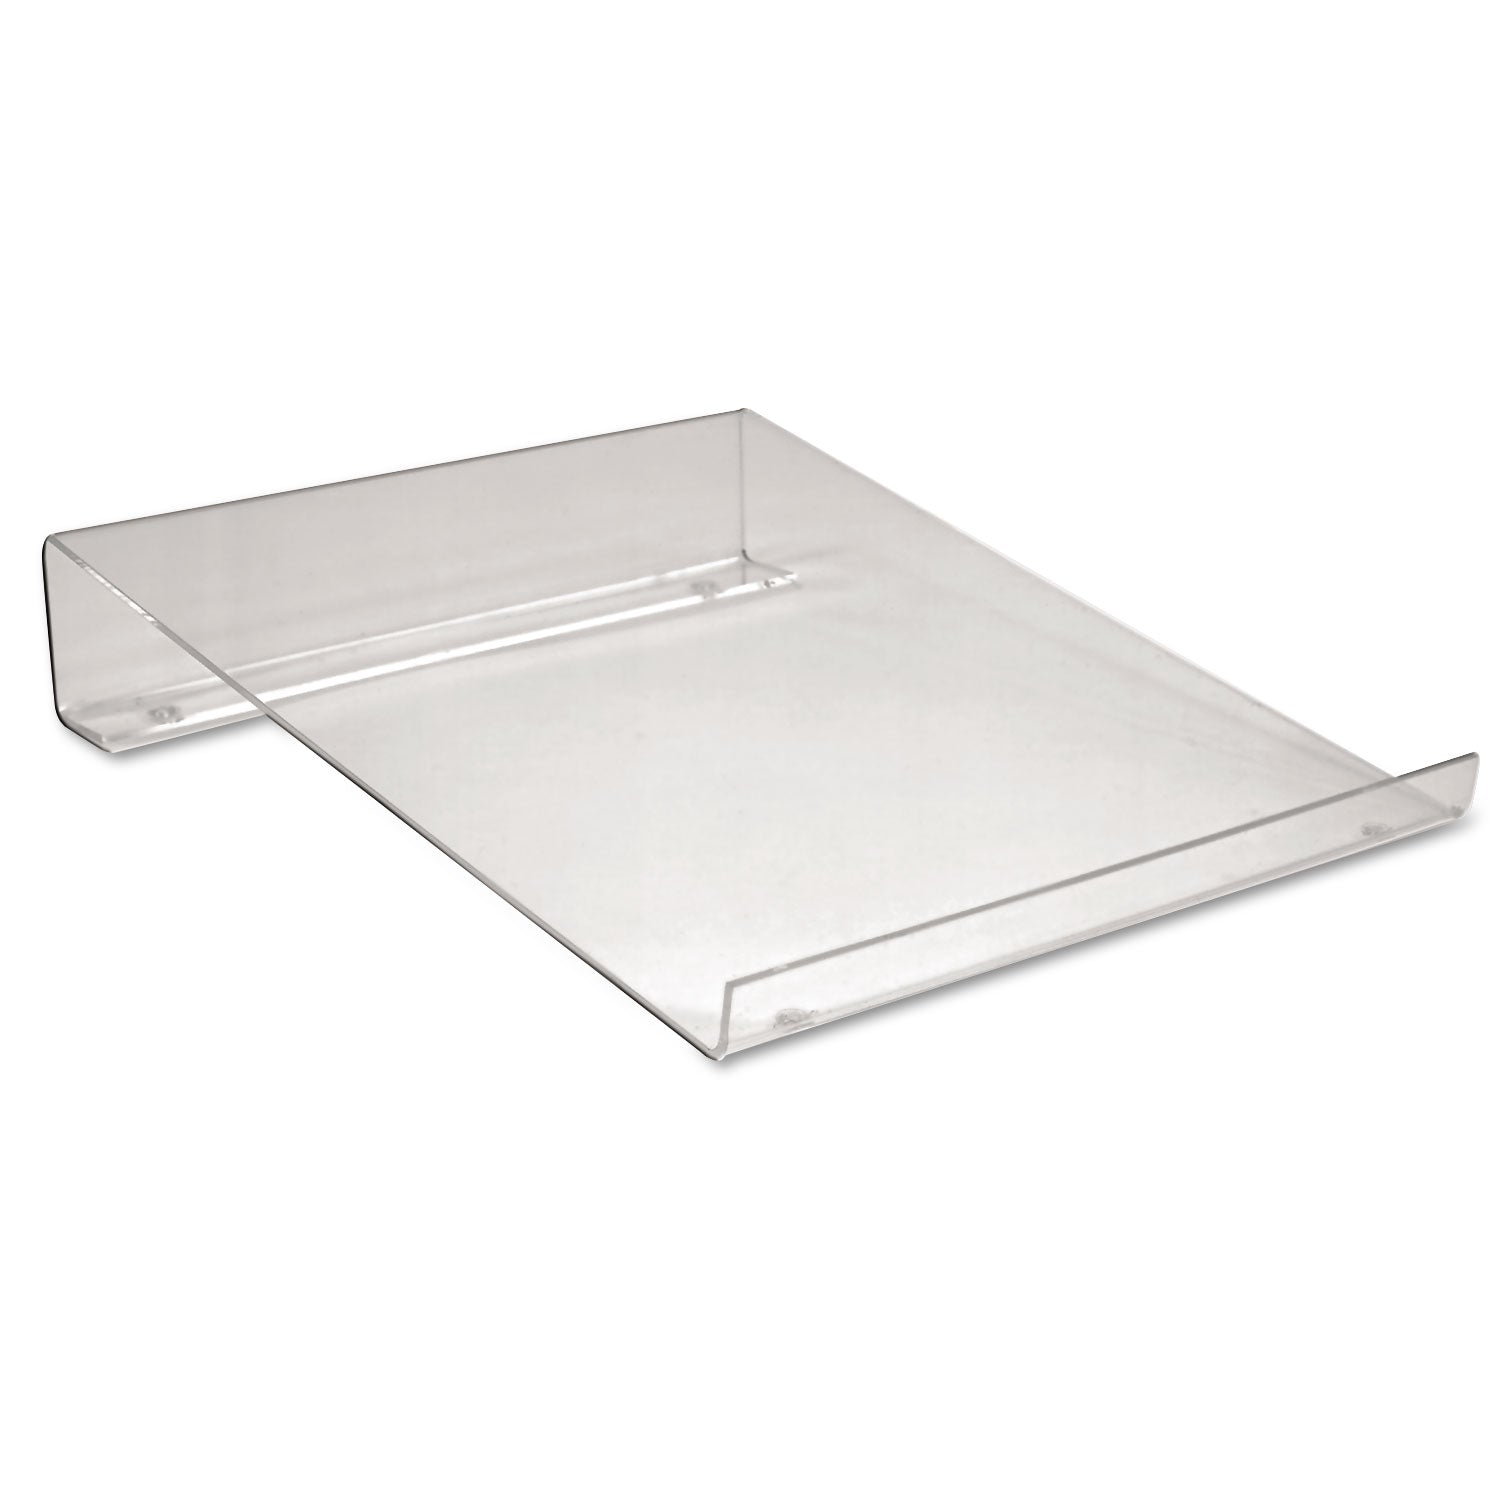 Large Angled Acrylic Calculator Stand, 9 x 11 x 2, Clear - 